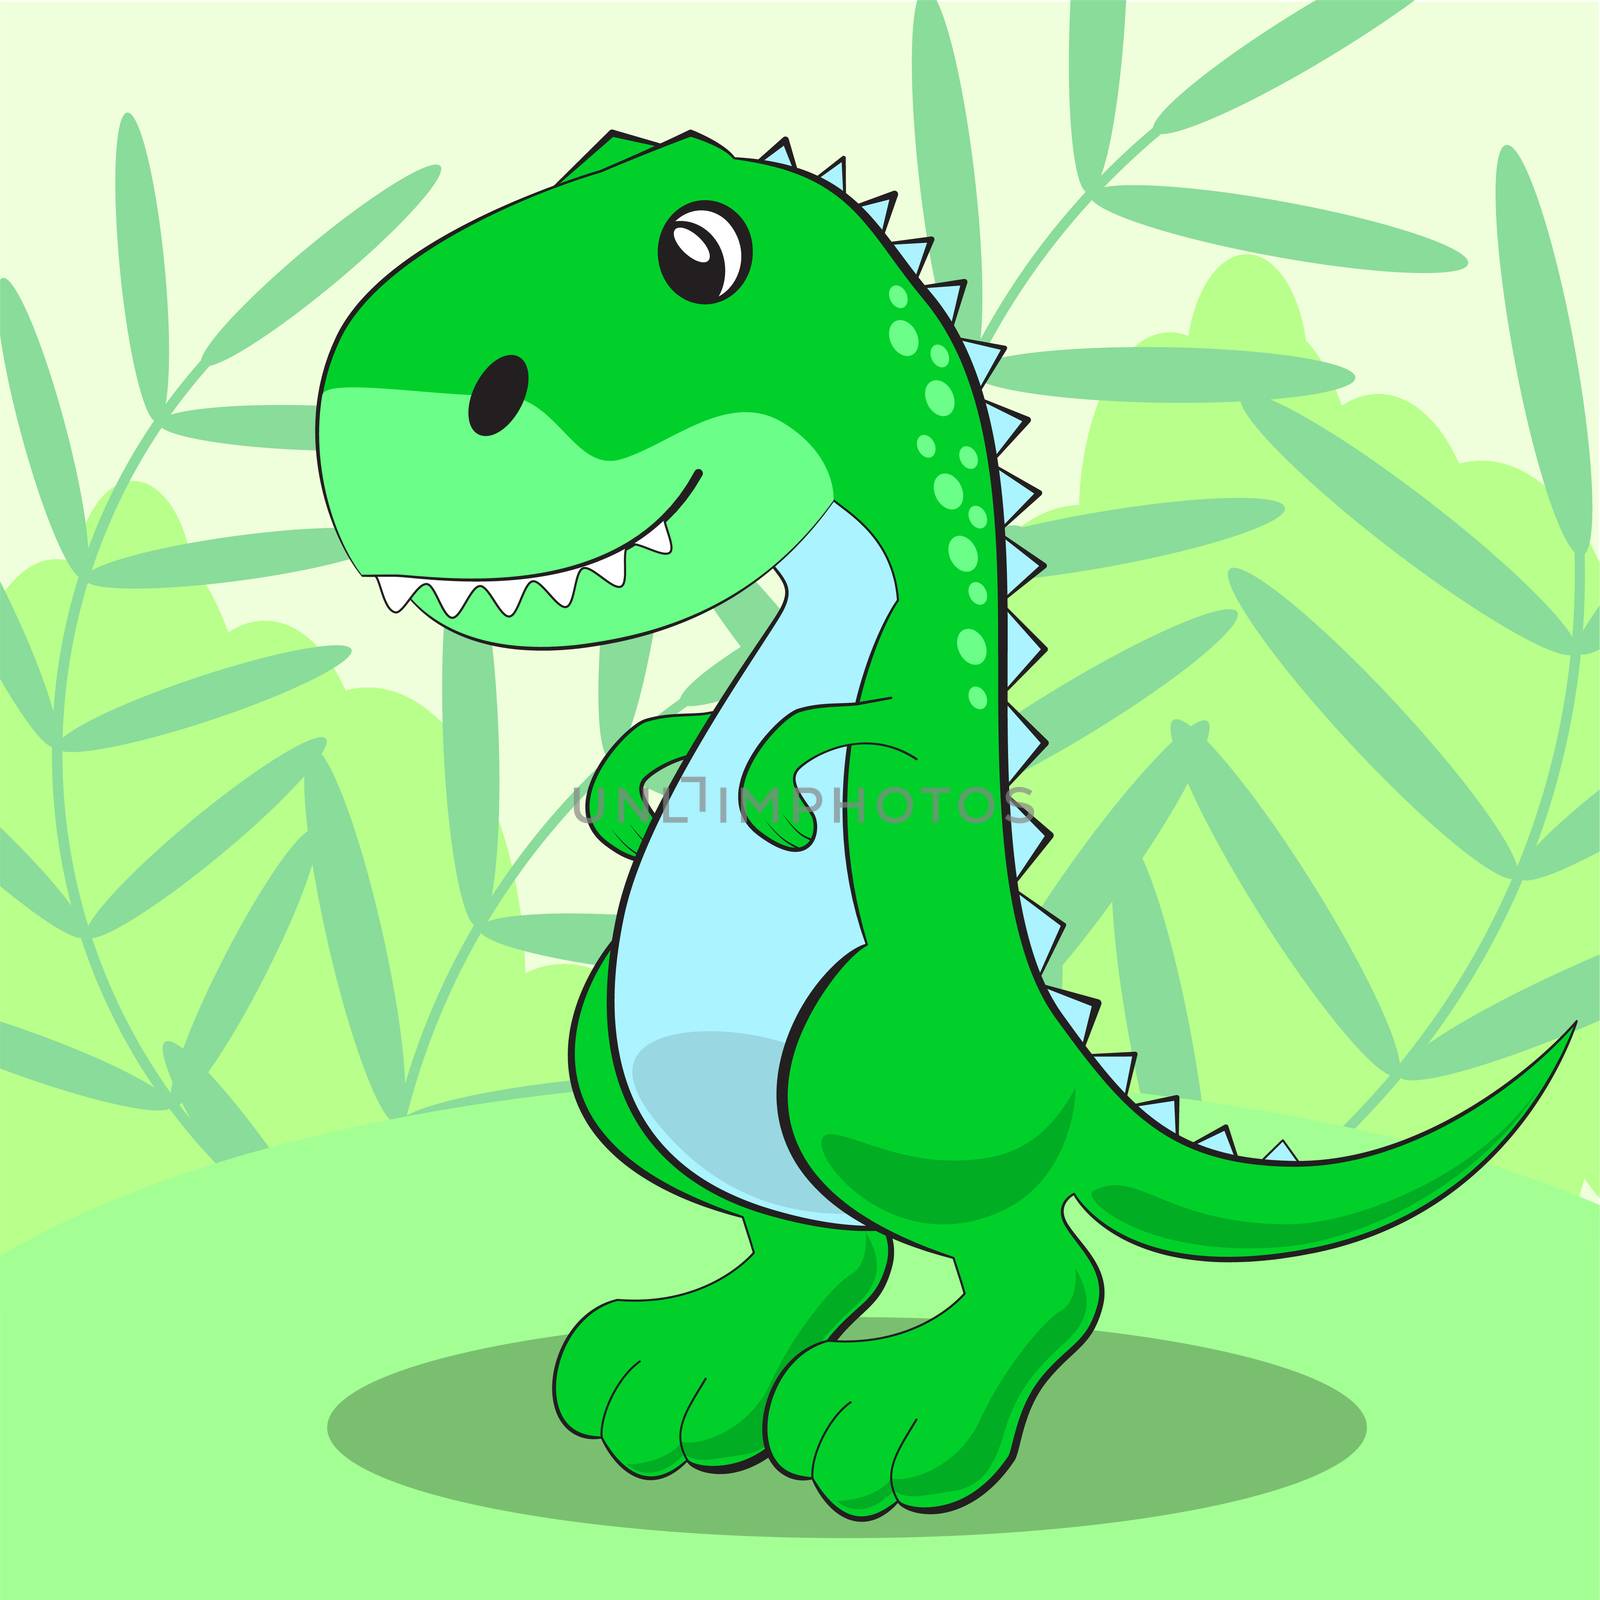 Cute dinosaur standing on a green meadow and smiling. by Adamchuk